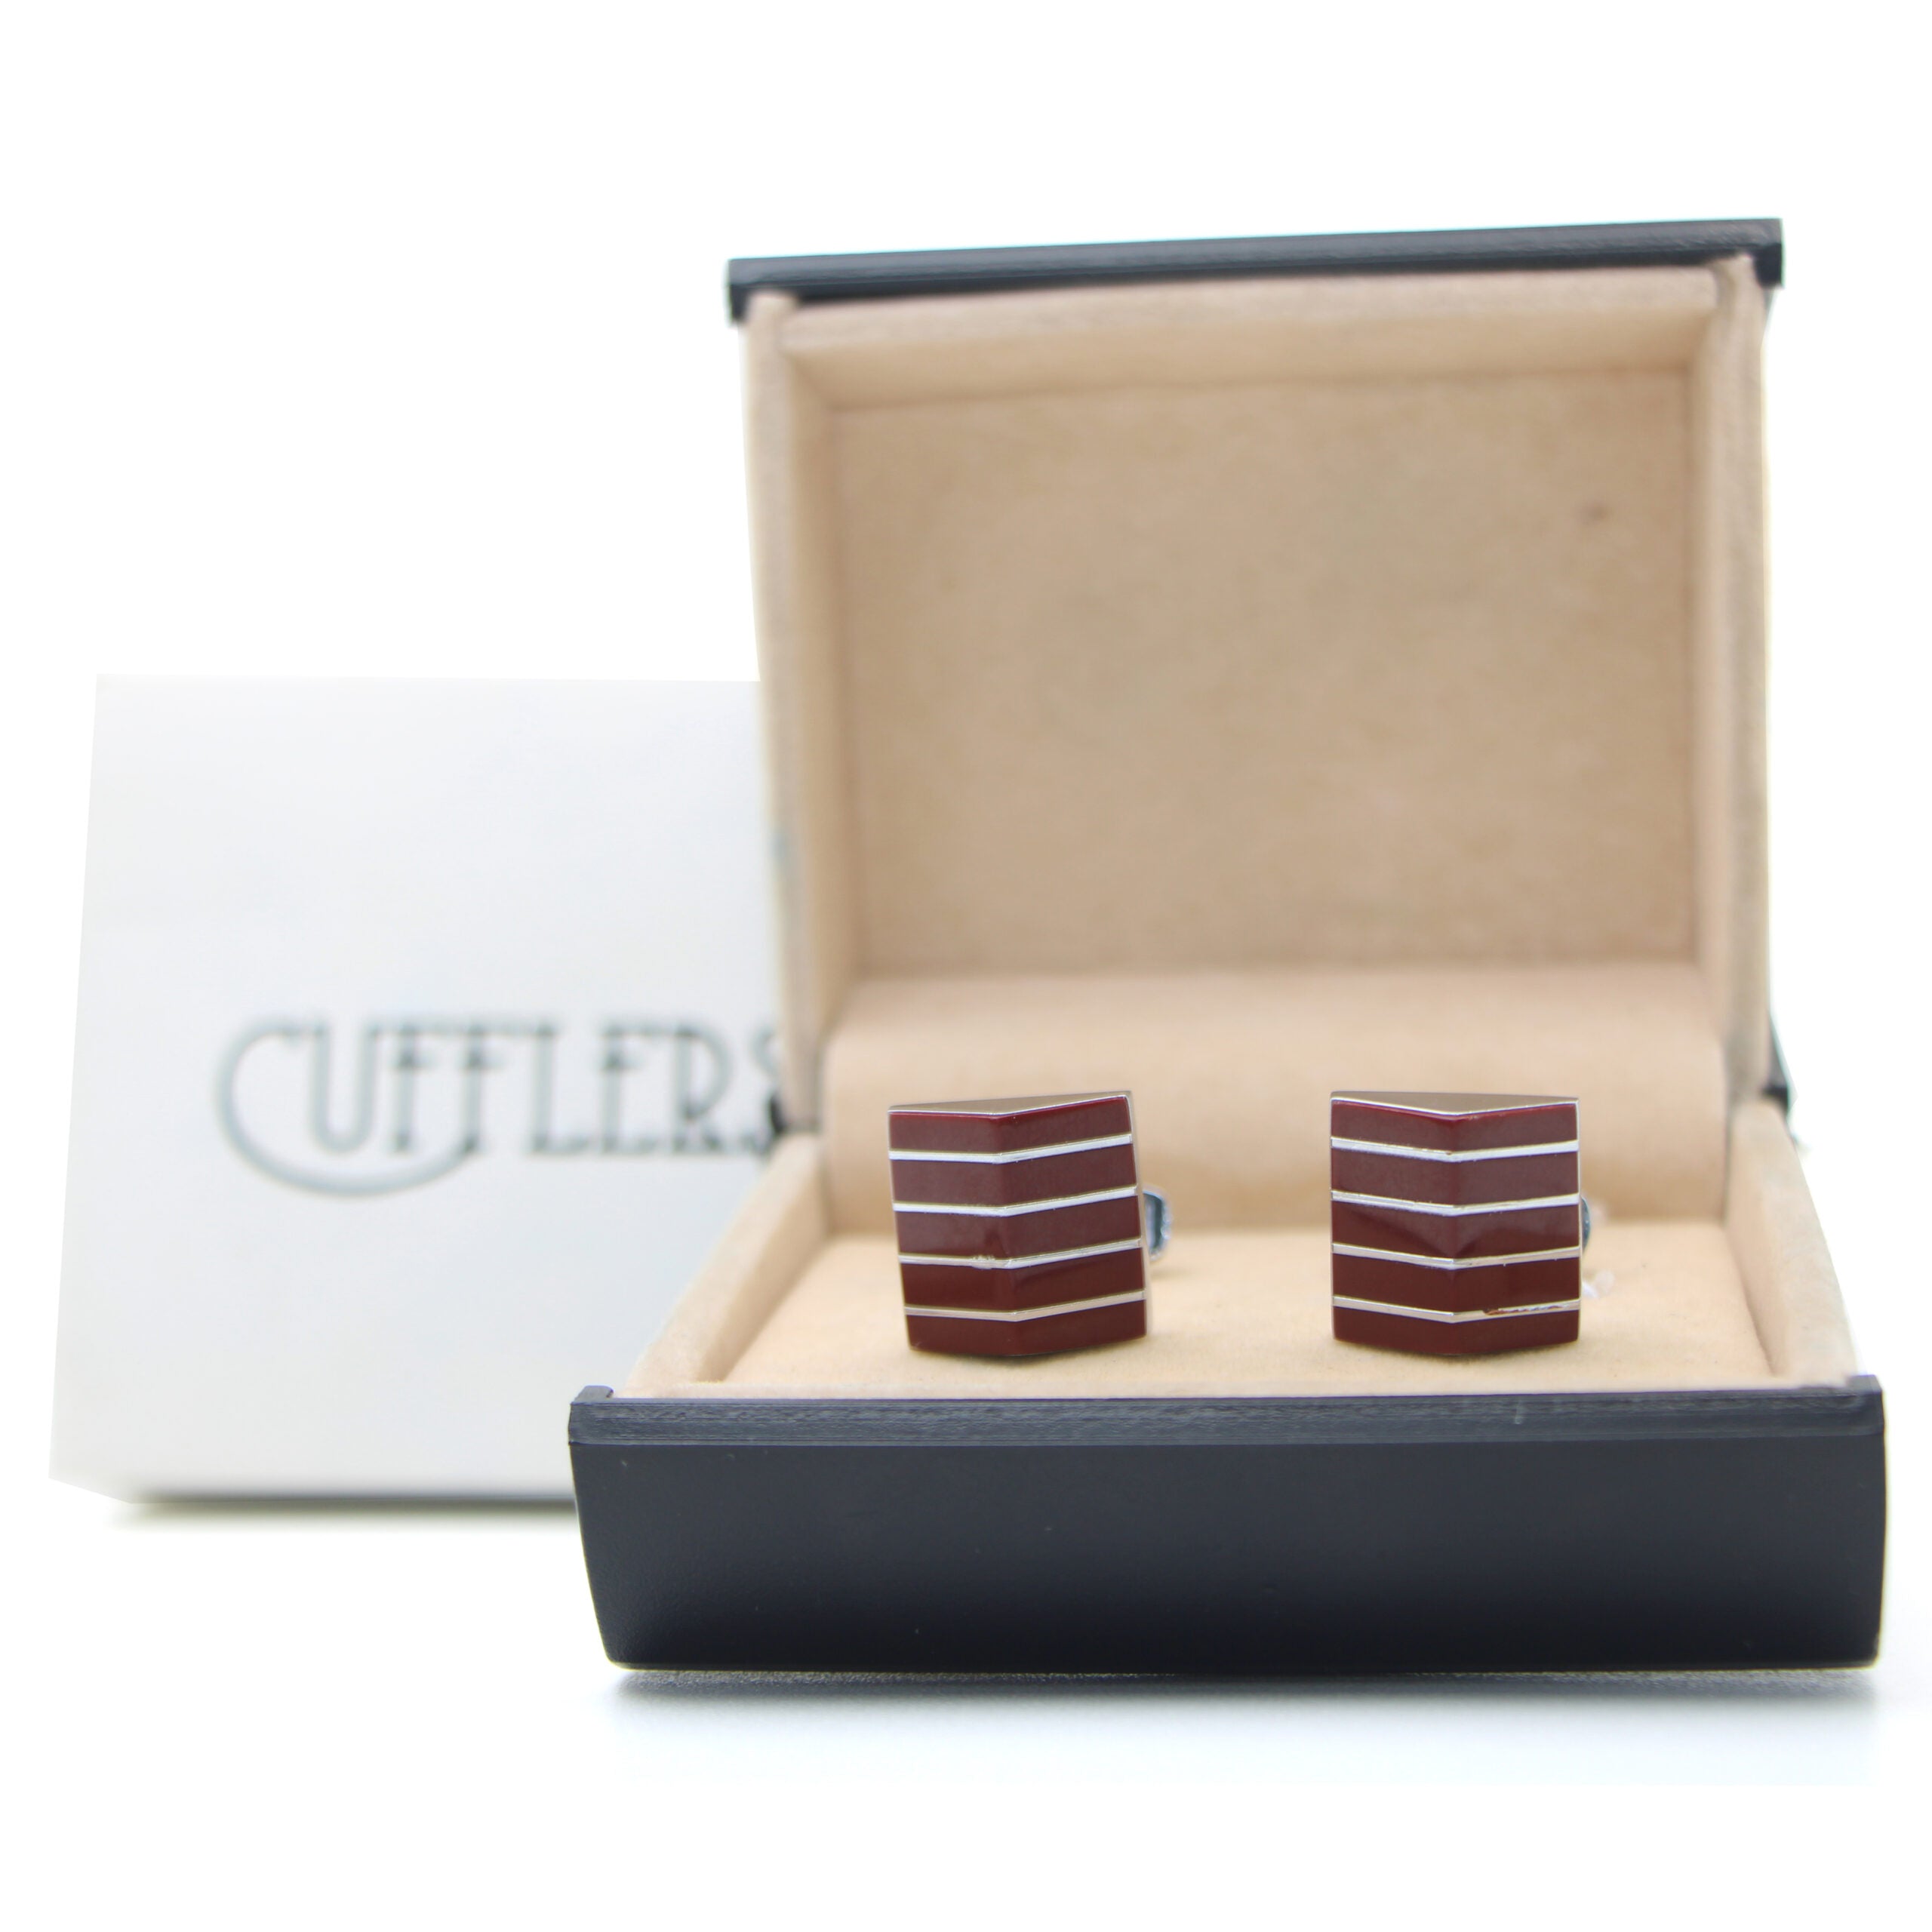 Vintage Cufflinks for Men's Shirt with a Gift Box - CU-1006